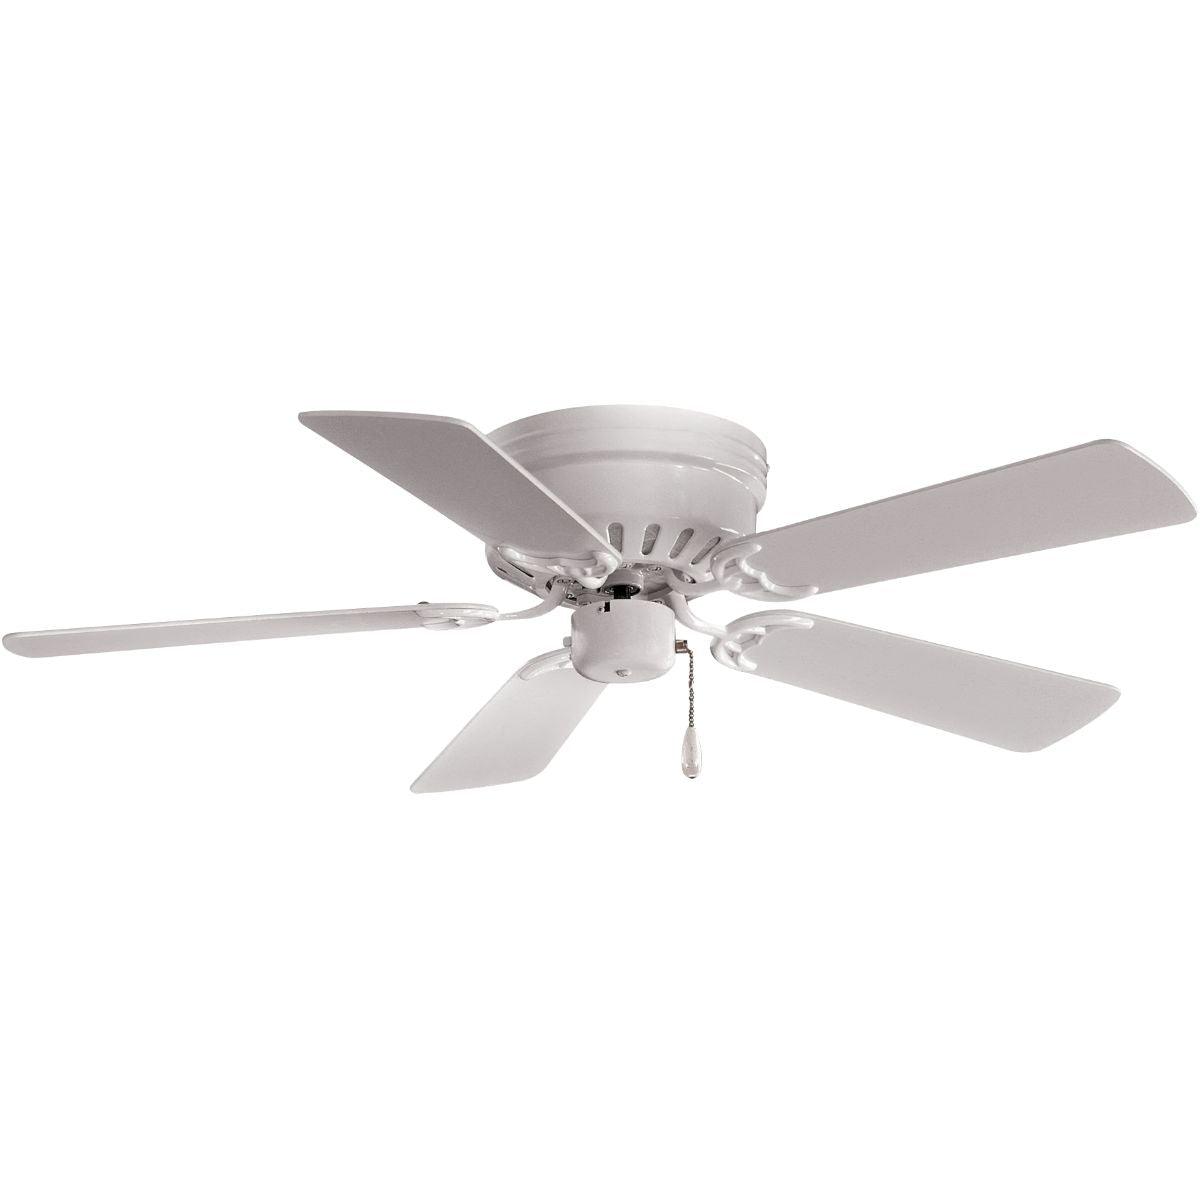 Mesa 42 Inch Ceiling Fan, White Finish, Pull Chain Included